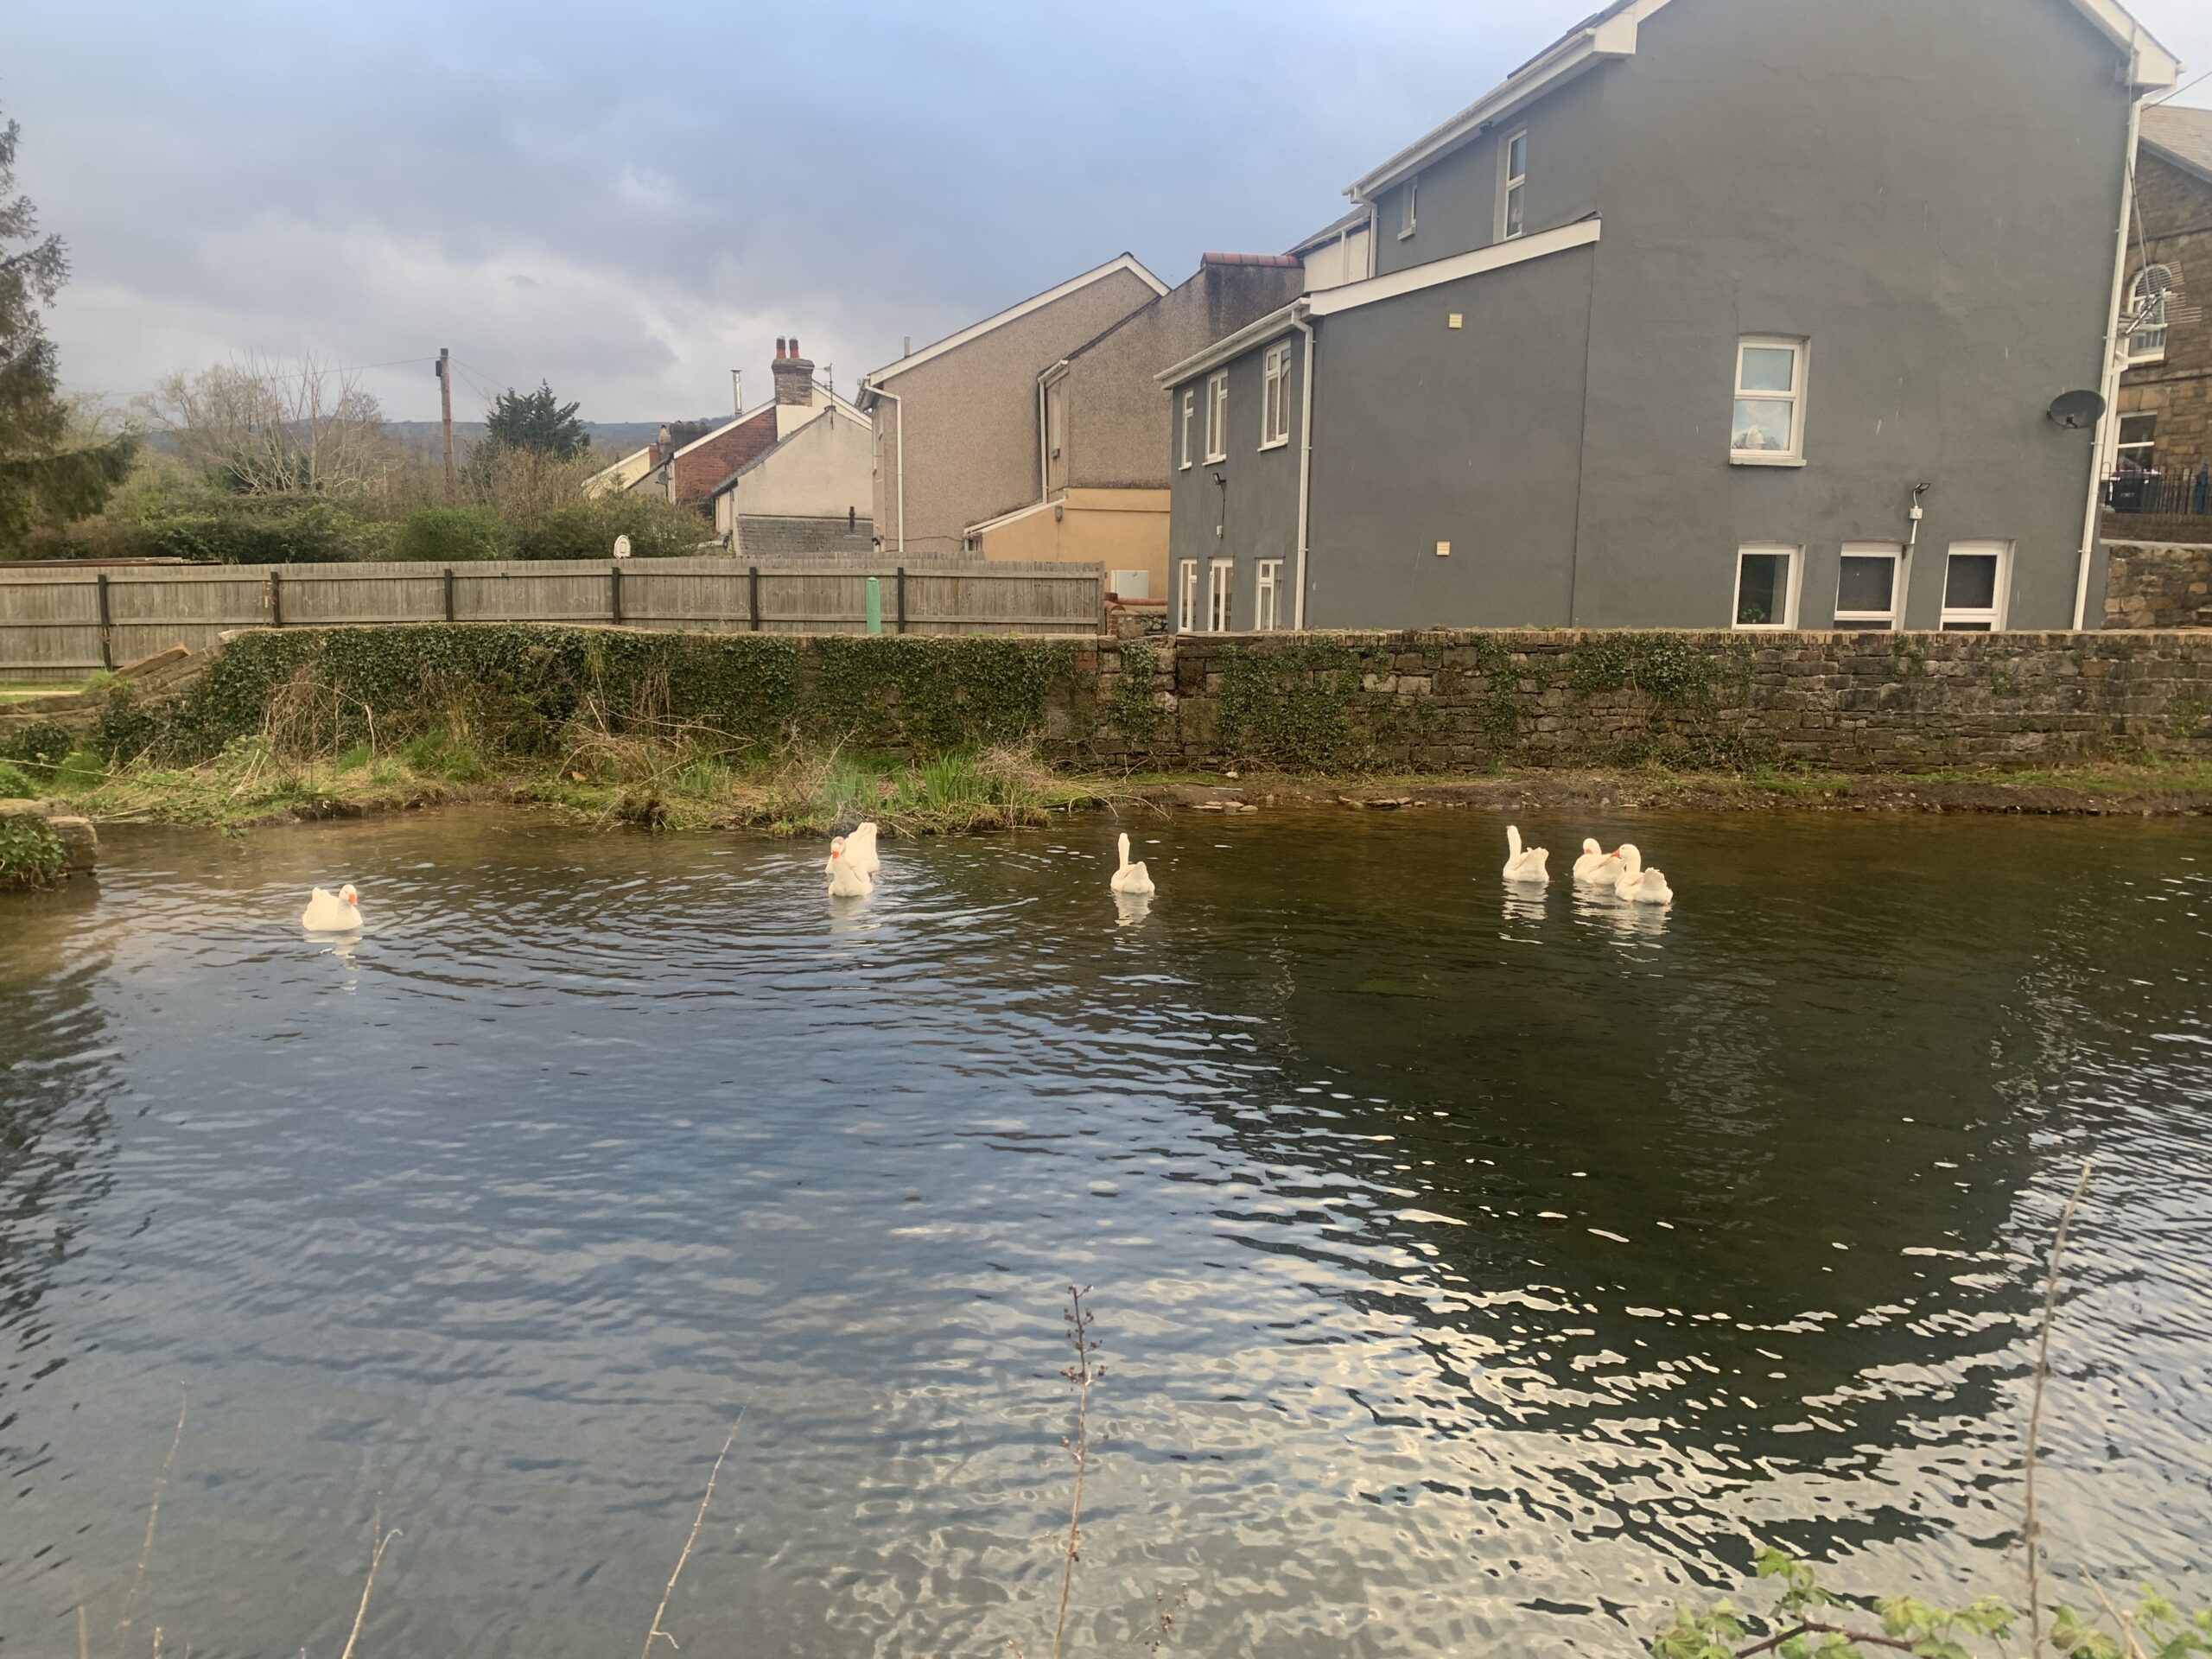 Geese on a canal